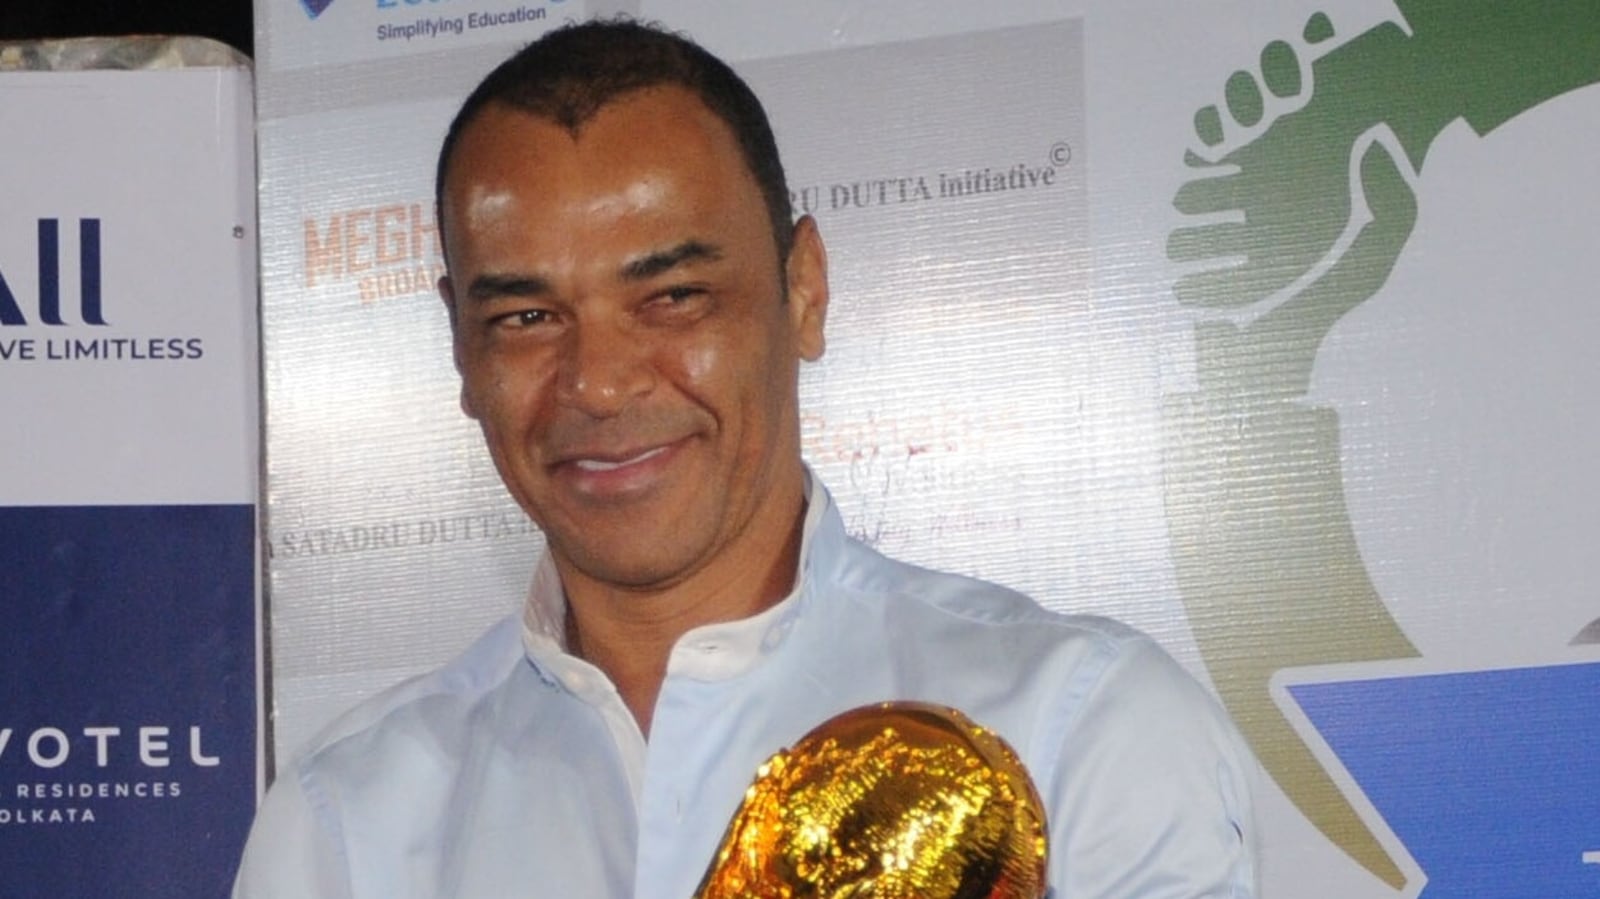 World Cup 2014: Brazil can rule the world again, says Cafu, The  Independent